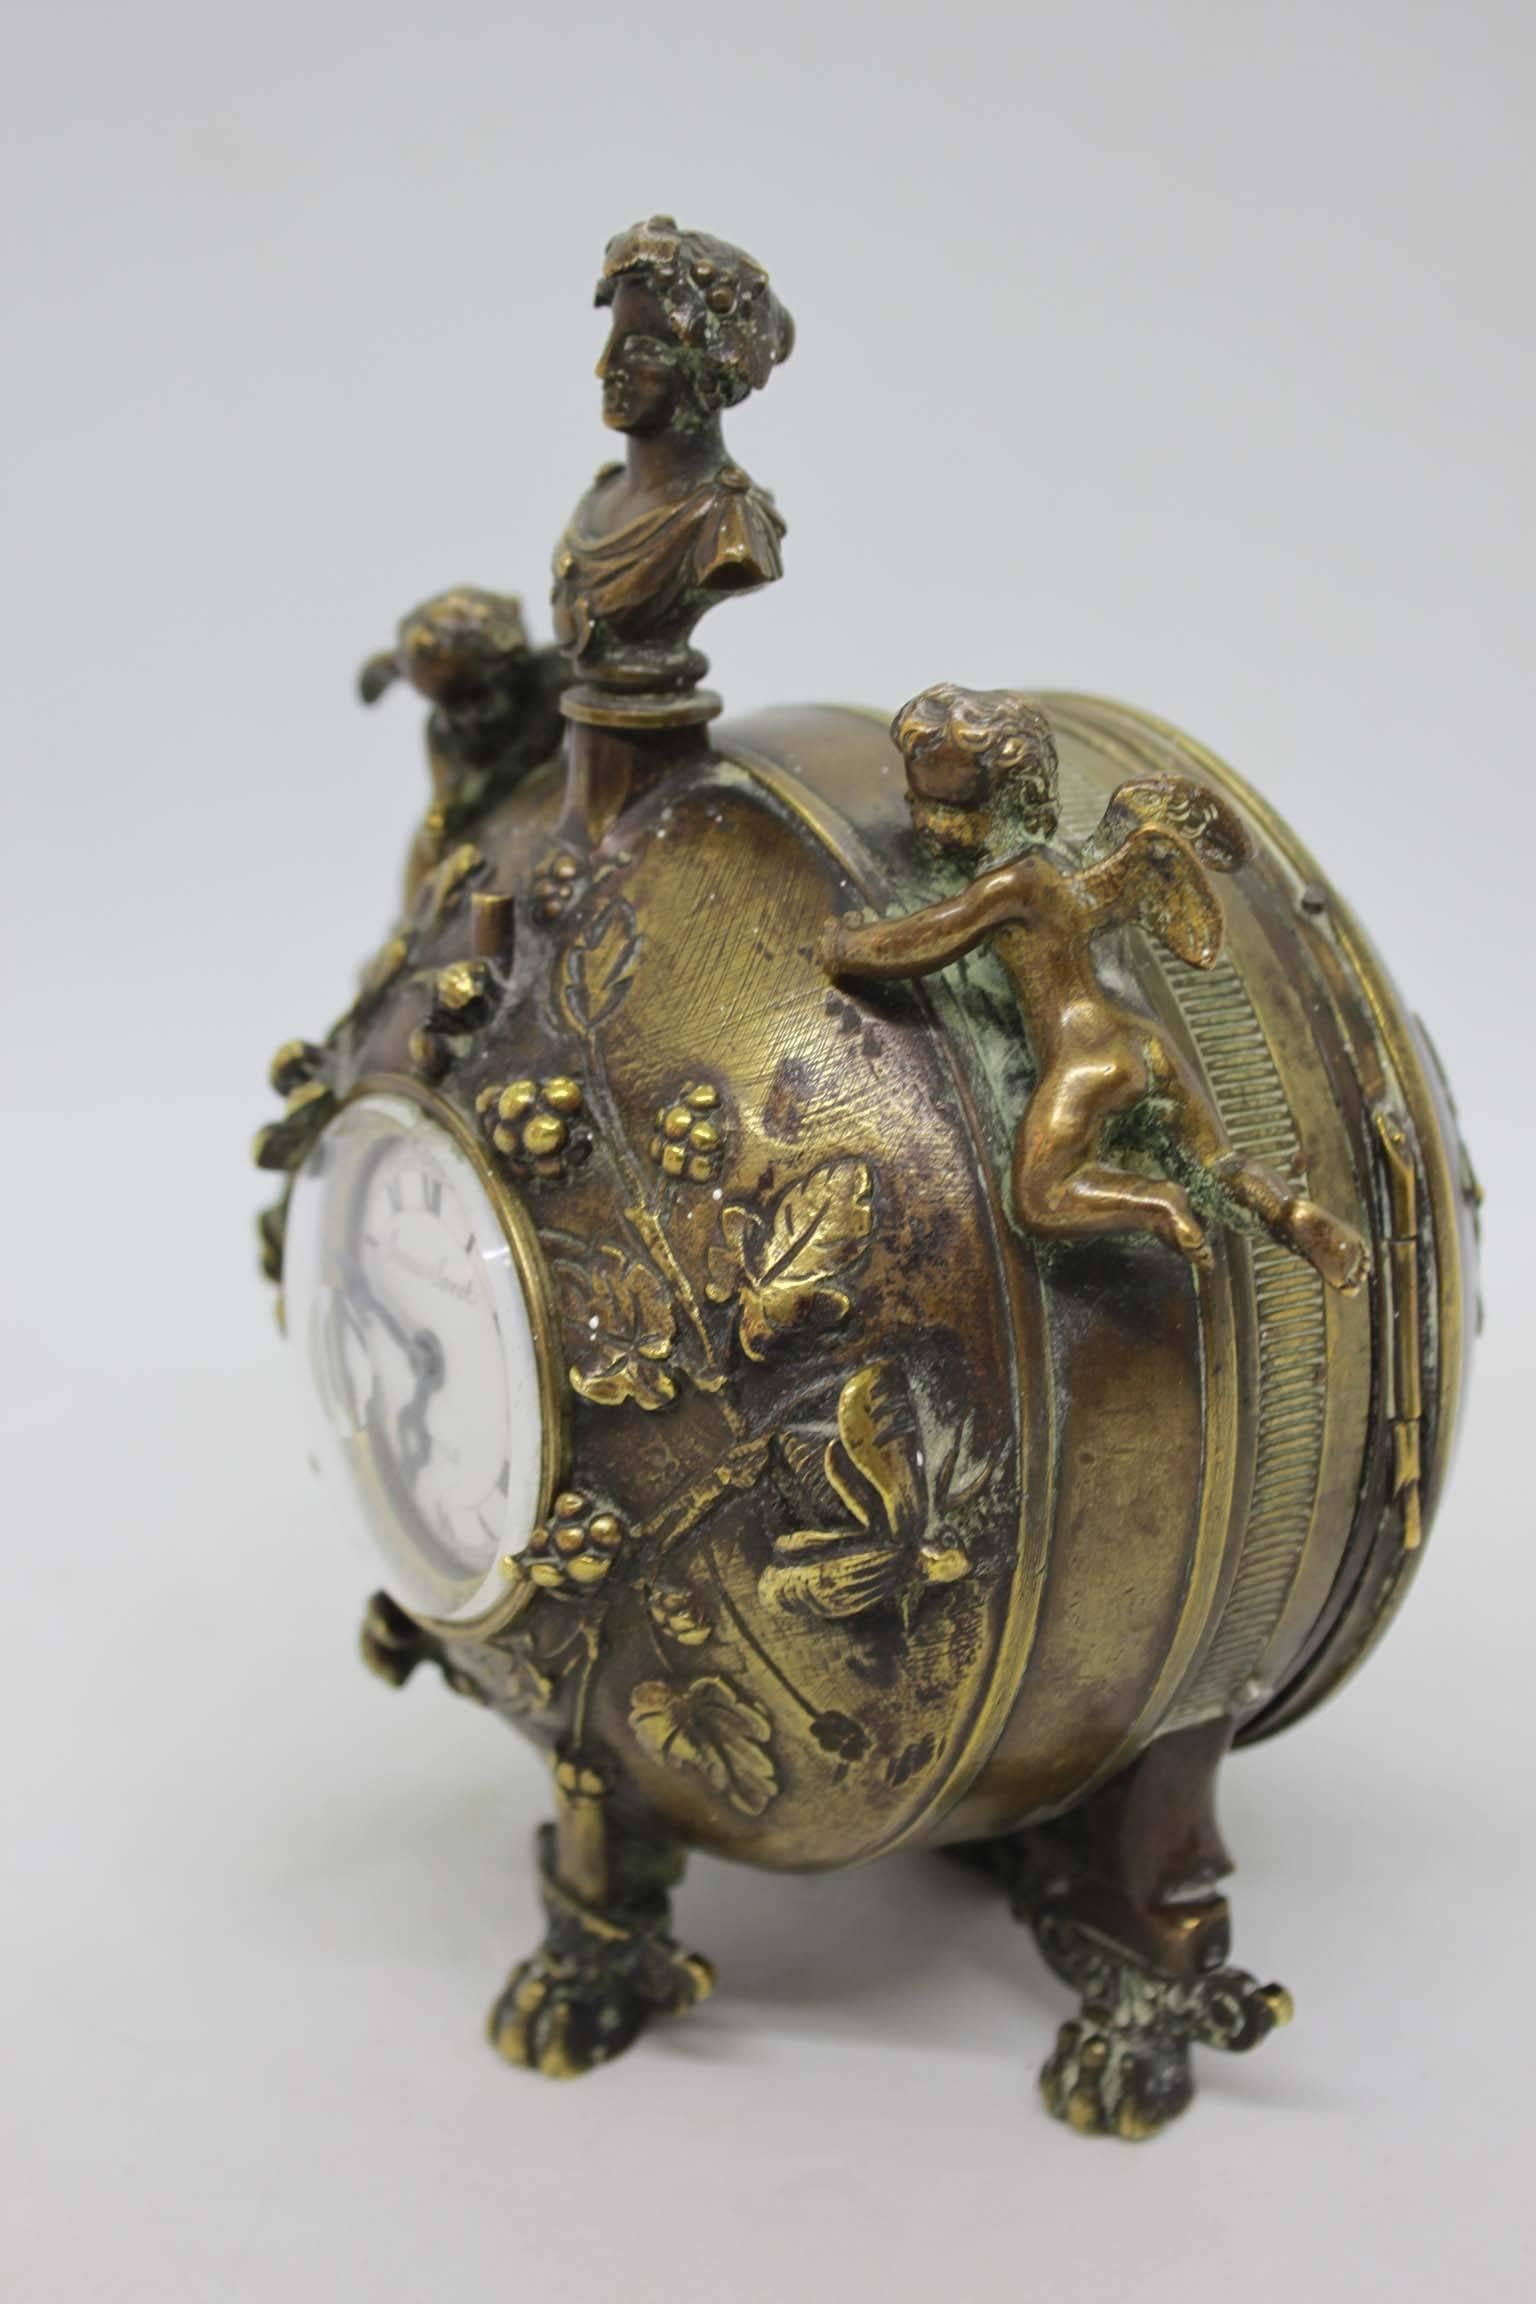 Small round bronze clock signed Isaac Soret & Fils, late 18th century with a female bust on top, two cherubs on the sides. Claw feet. Slight marks
Dimensions: Diameter 13cm, height 16cm.